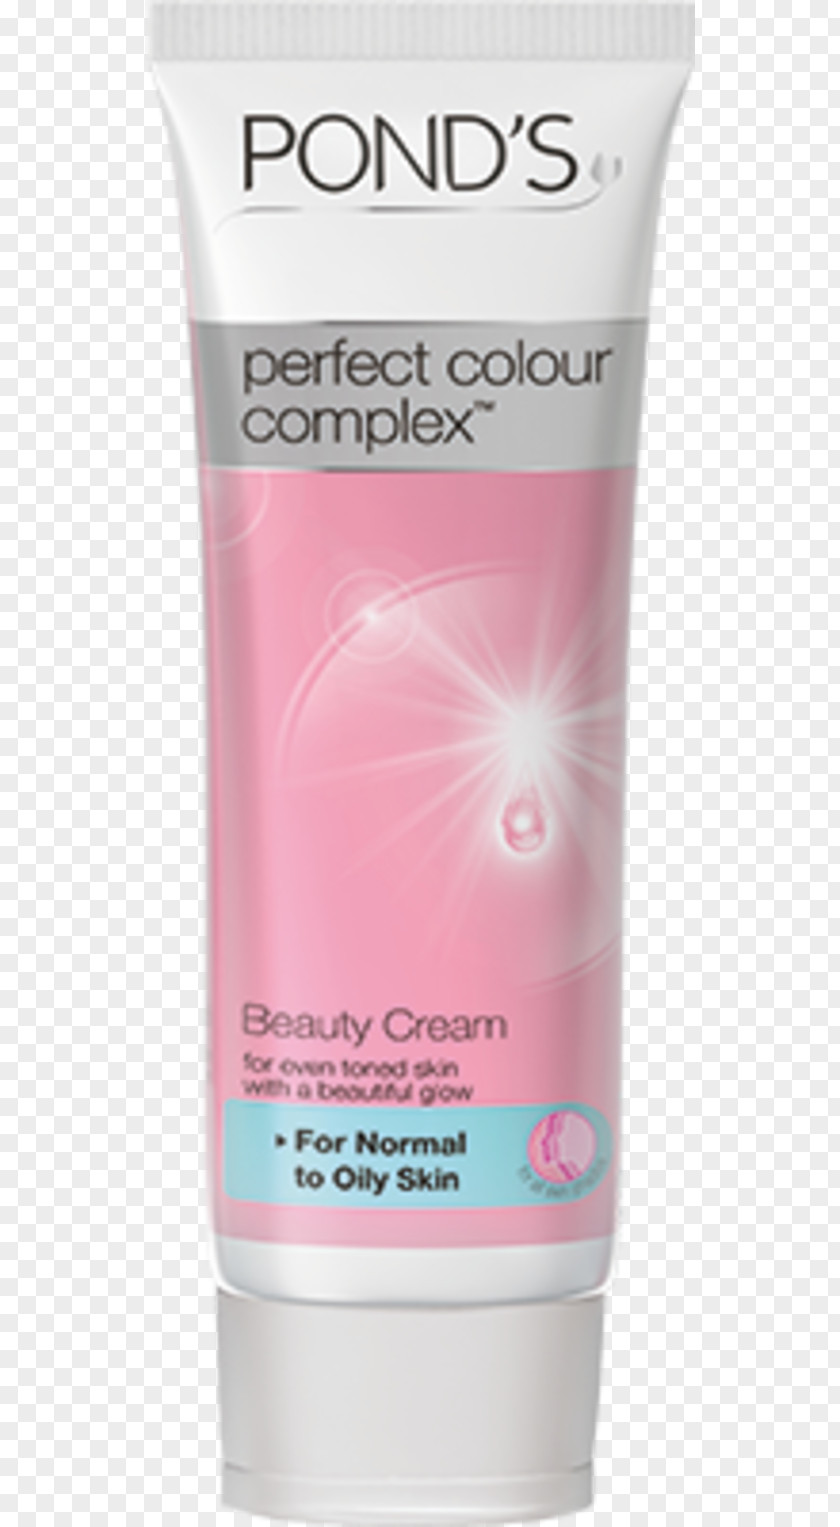 Oil Cream Lotion Pond's Human Skin PNG